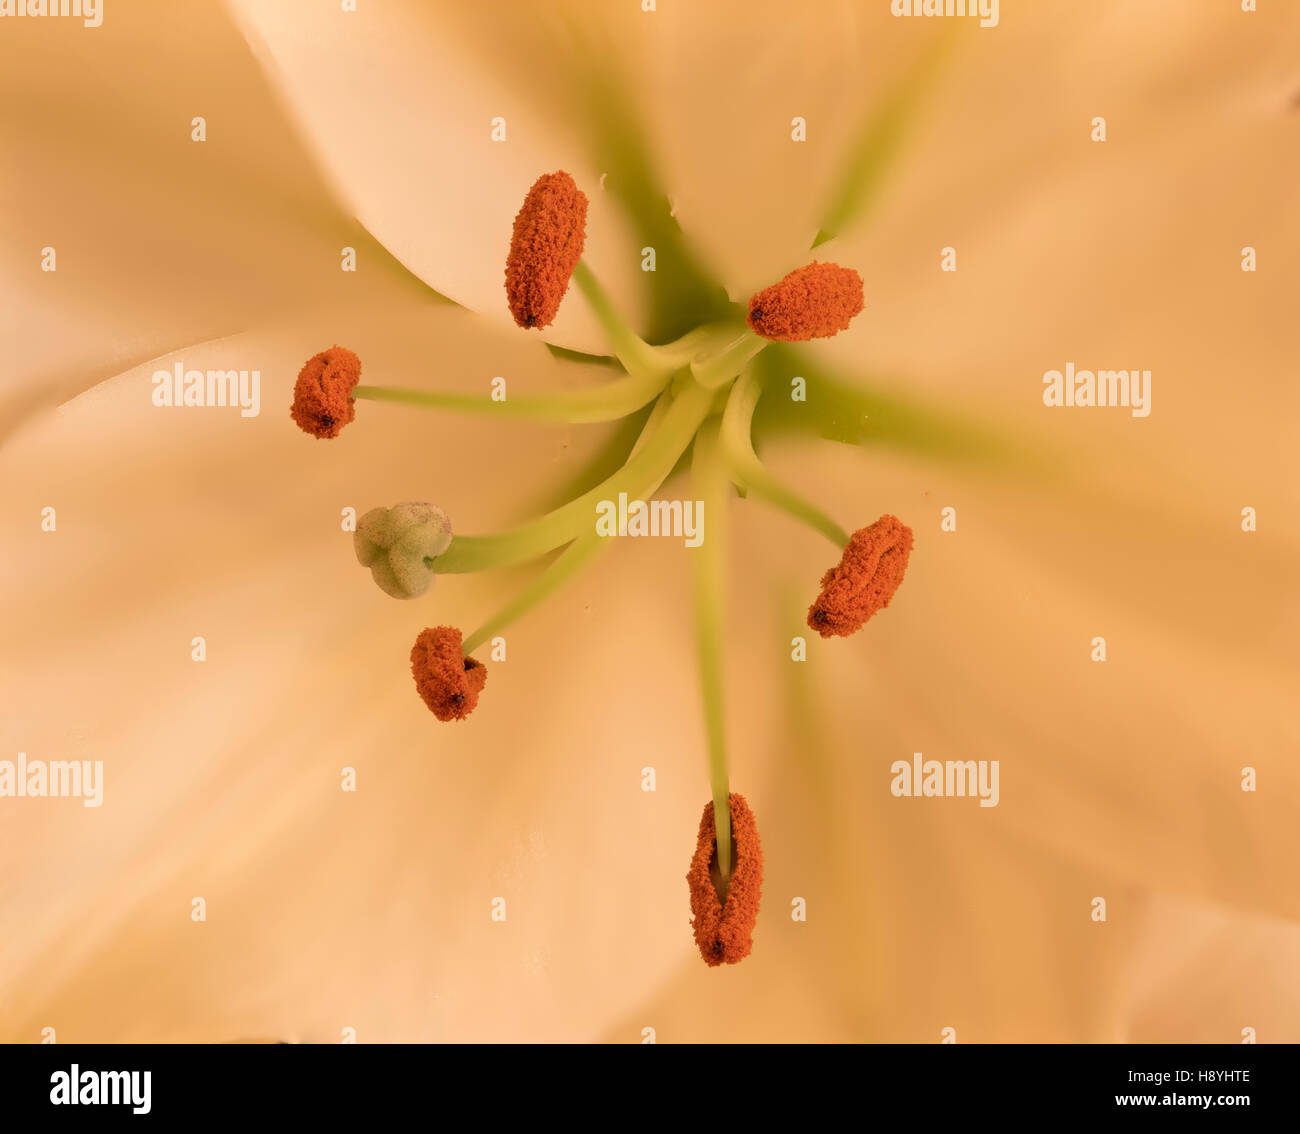 Lily, showing the stamen and pistil details Stock Photo